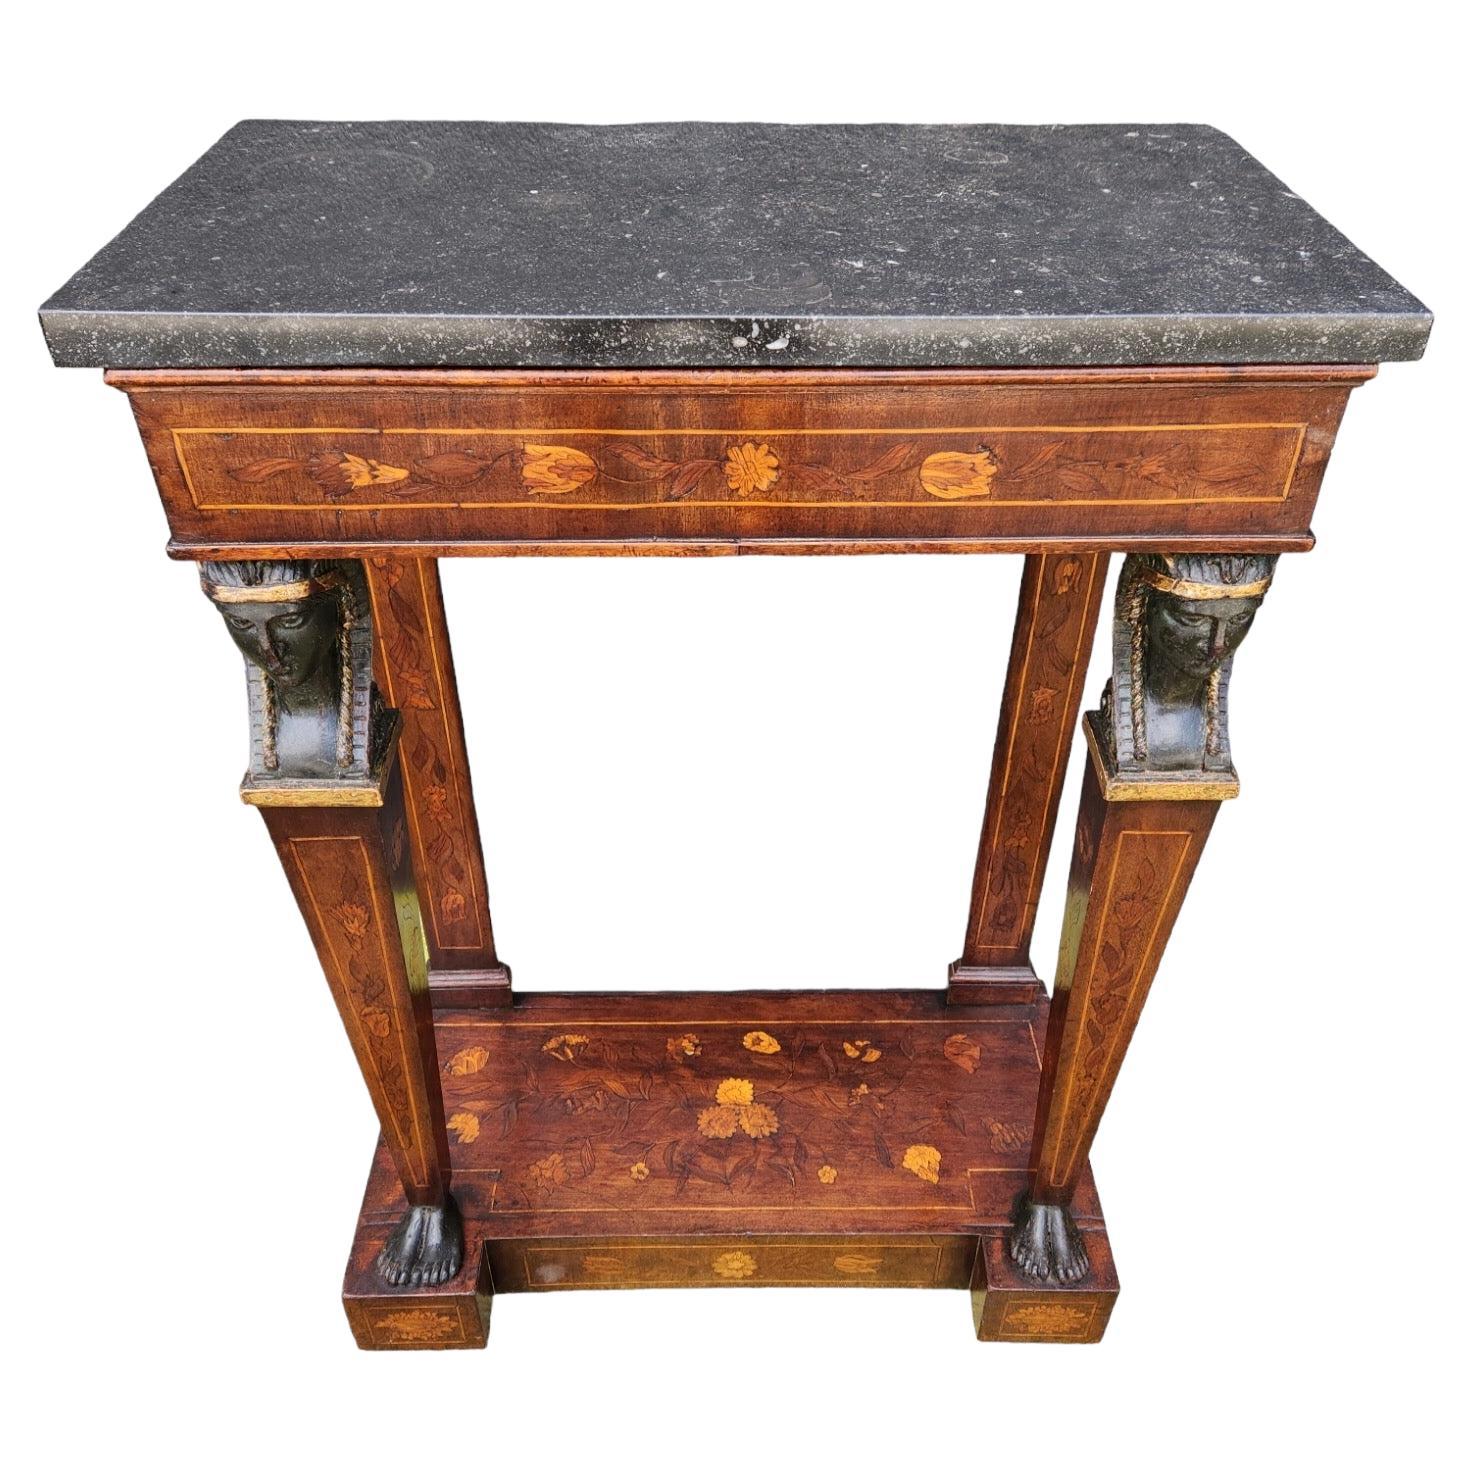 19th Century Italian Inlaid Neoclassical Console Table For Sale